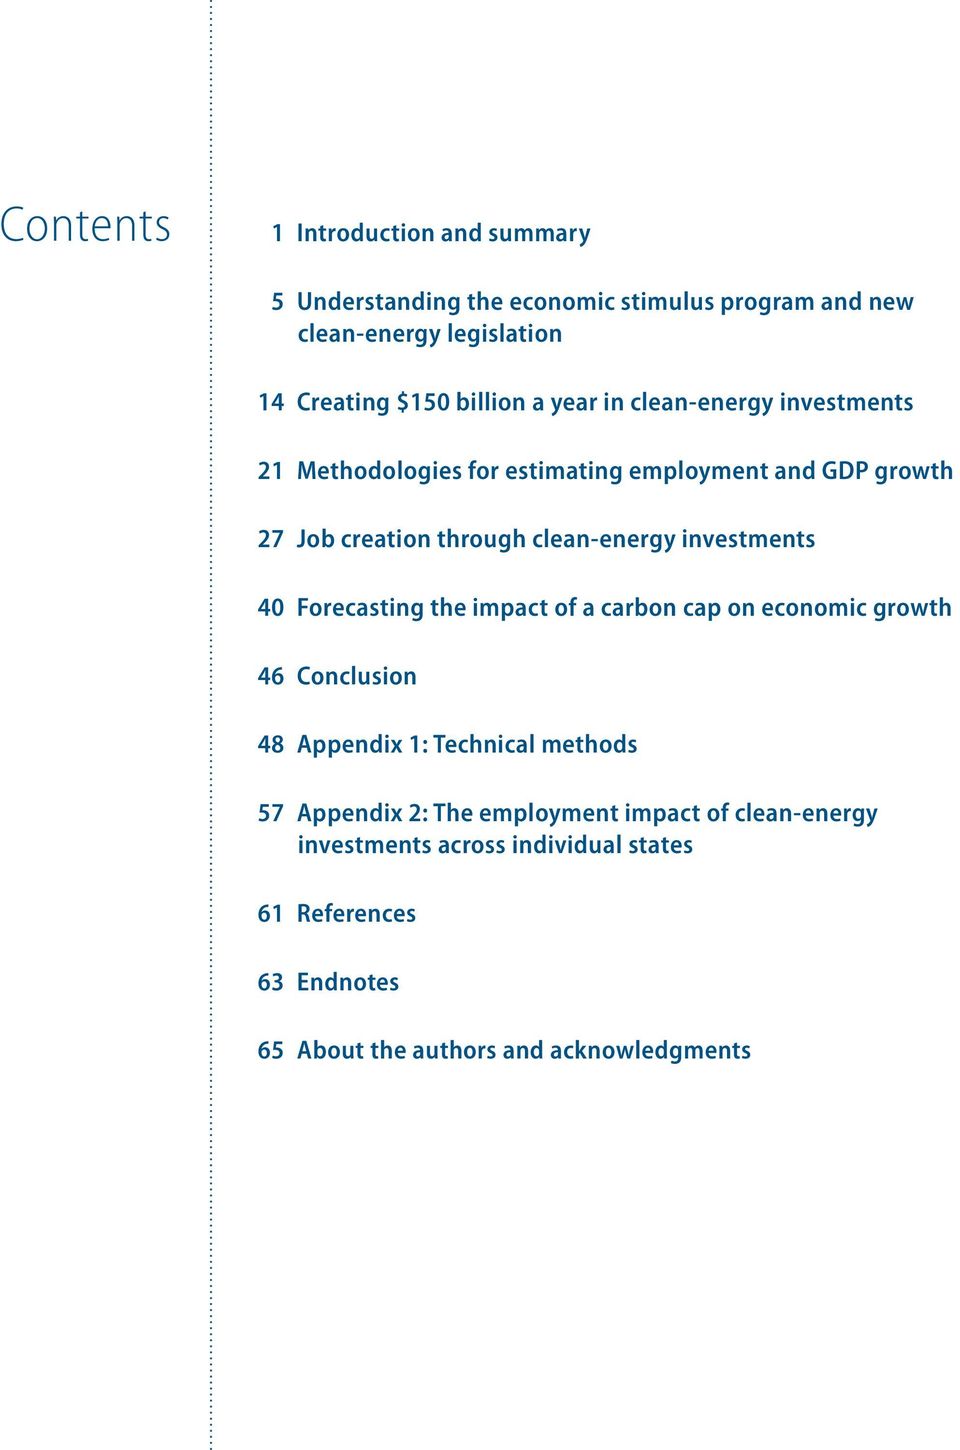 clean-energy investments 40 Forecasting the impact of a carbon cap on economic growth 46 Conclusion 48 Appendix 1: Technical methods 57